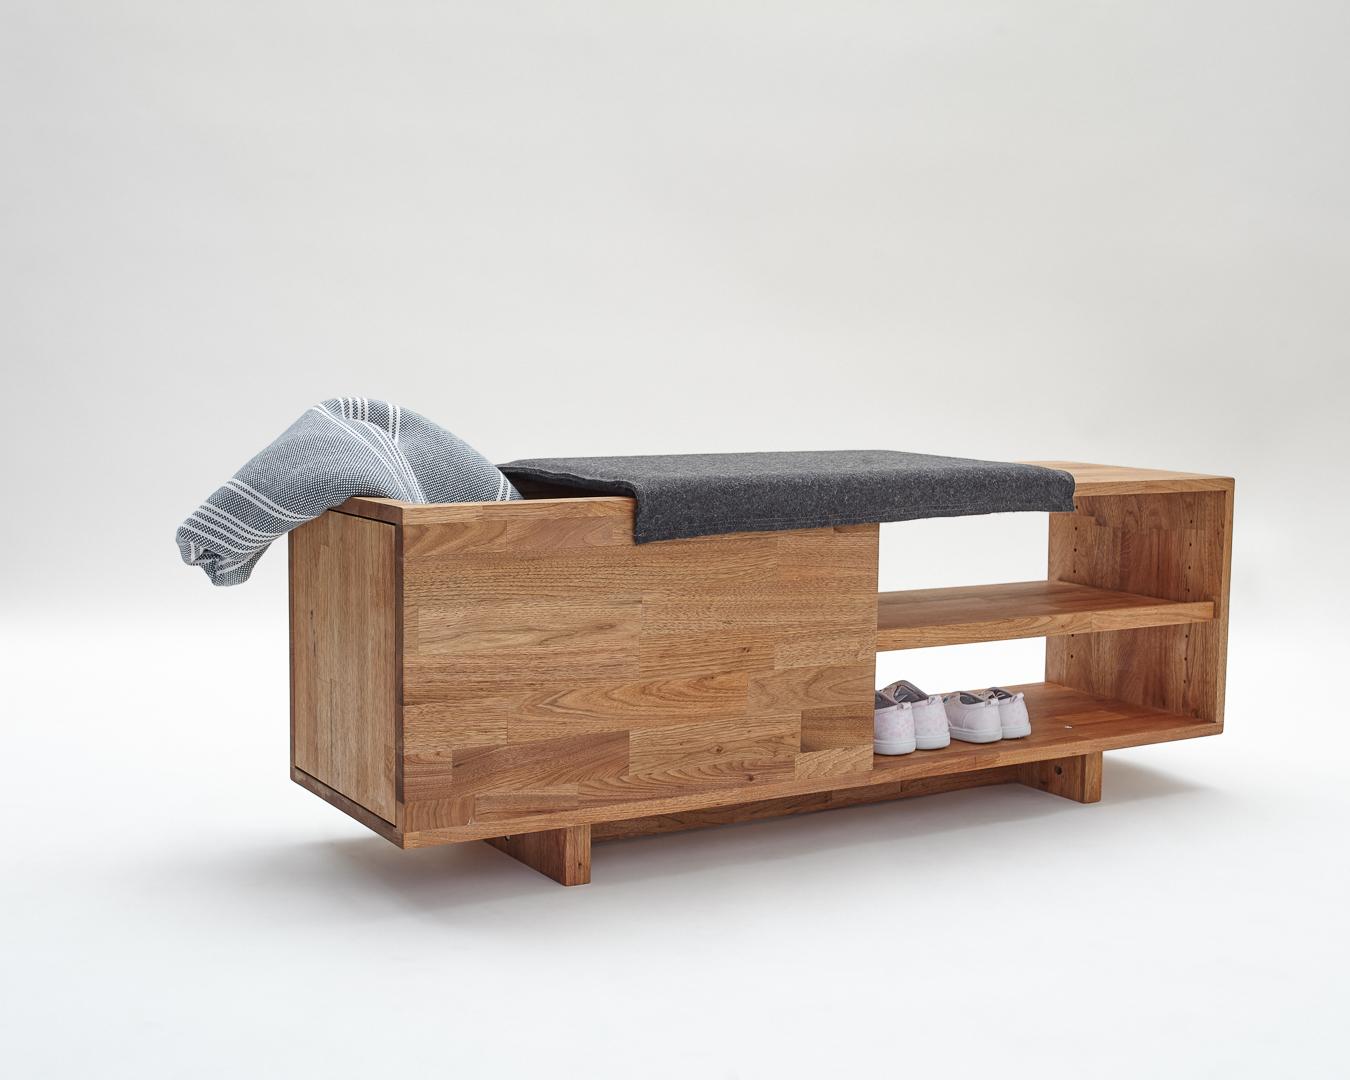 Expertly crafted using the highest quality English Walnut, the LAXseries Storage Bench is sleek and sophisticated. It incorporates a comfortable and convenient sliding padded seat to conceal a spacious storage compartment within. The two shelves